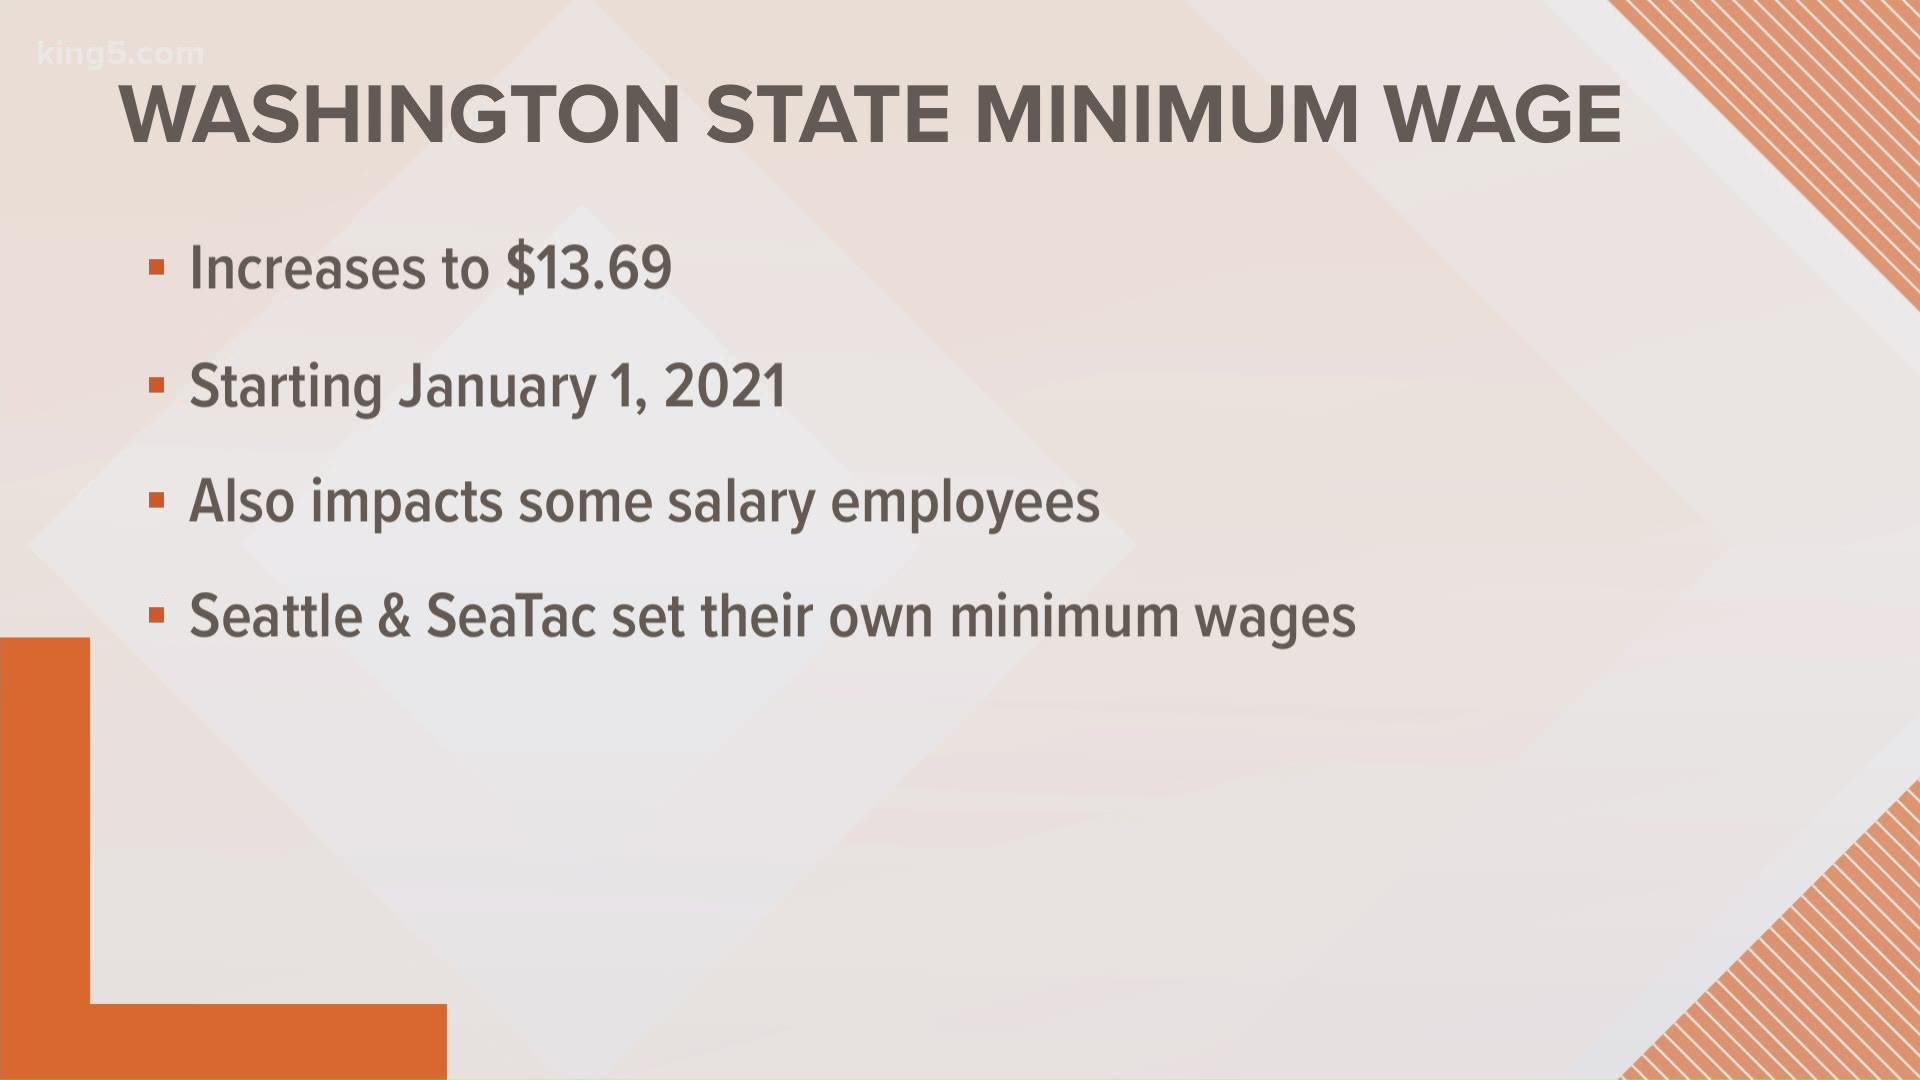 The minimum wage across the state will increase by 19 cents to $13.69 an hour.